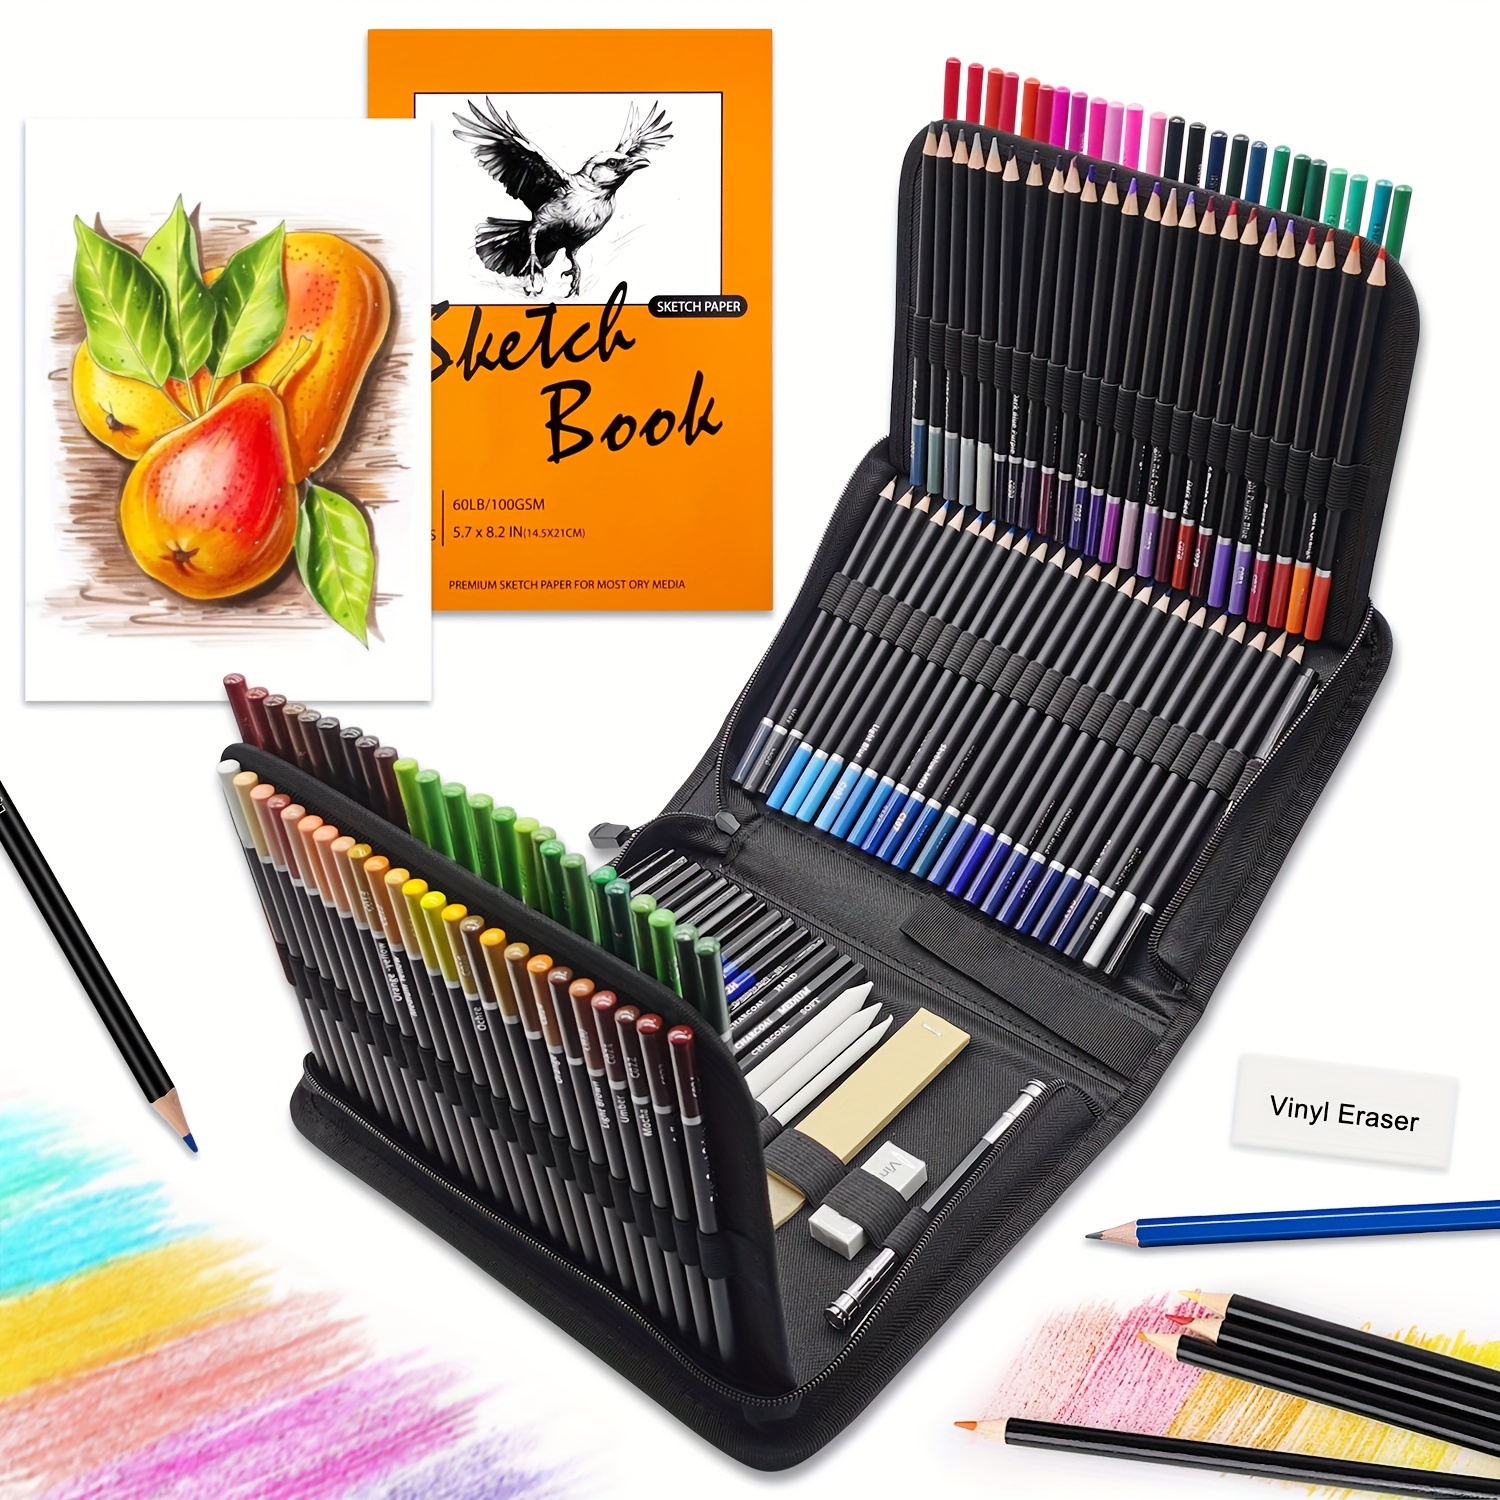 KALOUR 76 Drawing Sketching Kit Set - Pro Art Supplies with Sketchbook & Watercolor Paper - Include tutorial,watercolor,graph